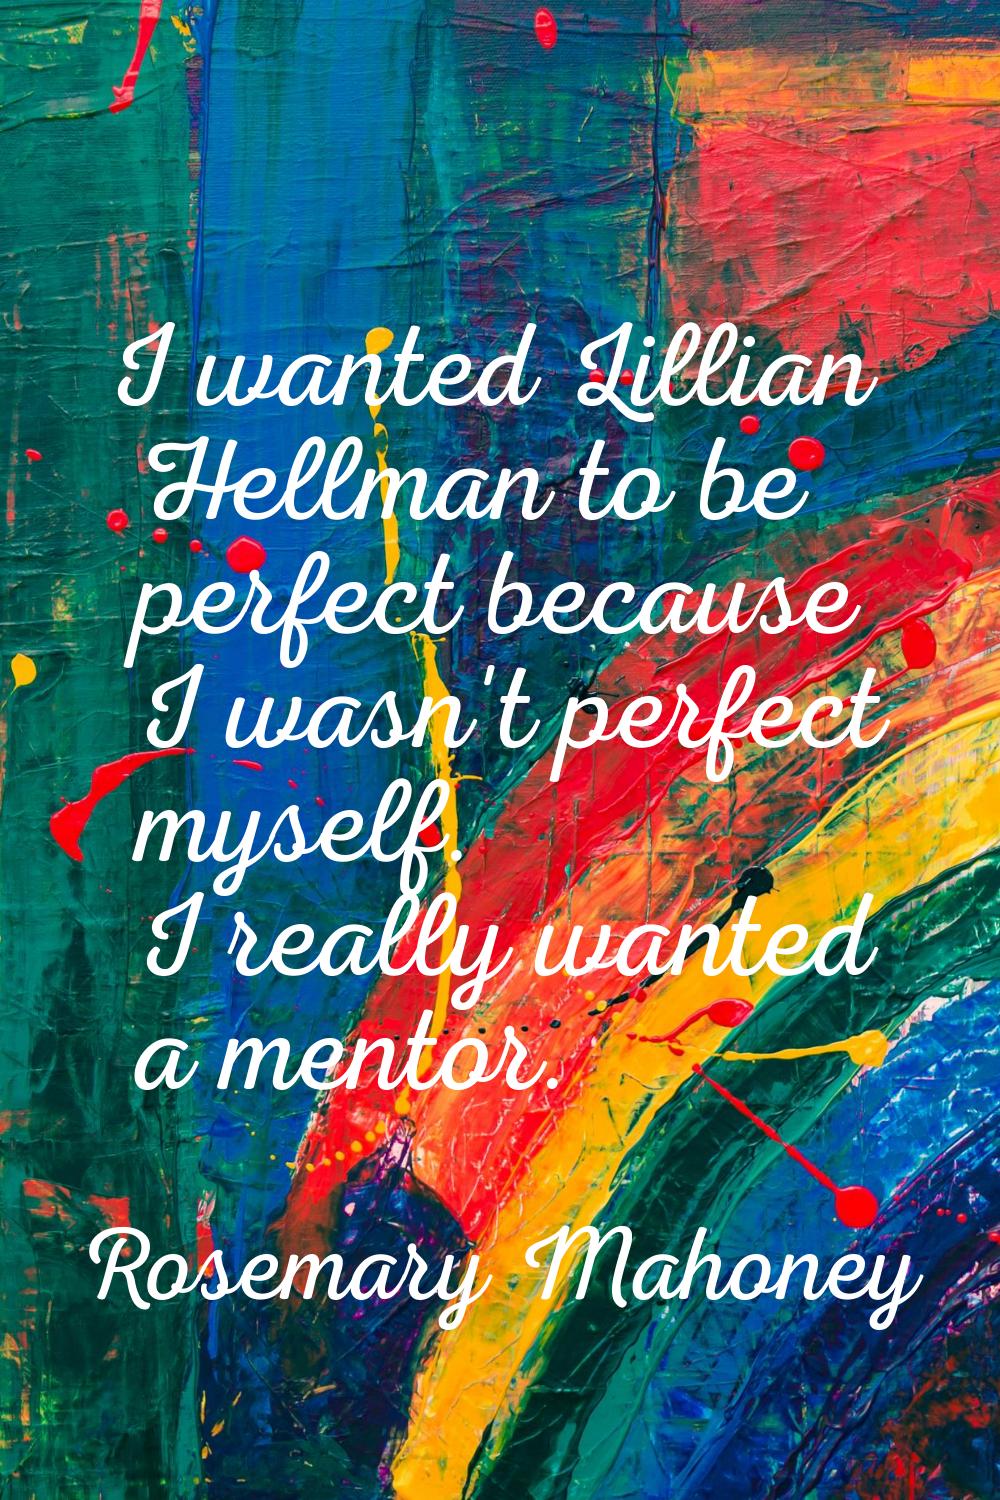 I wanted Lillian Hellman to be perfect because I wasn't perfect myself. I really wanted a mentor.